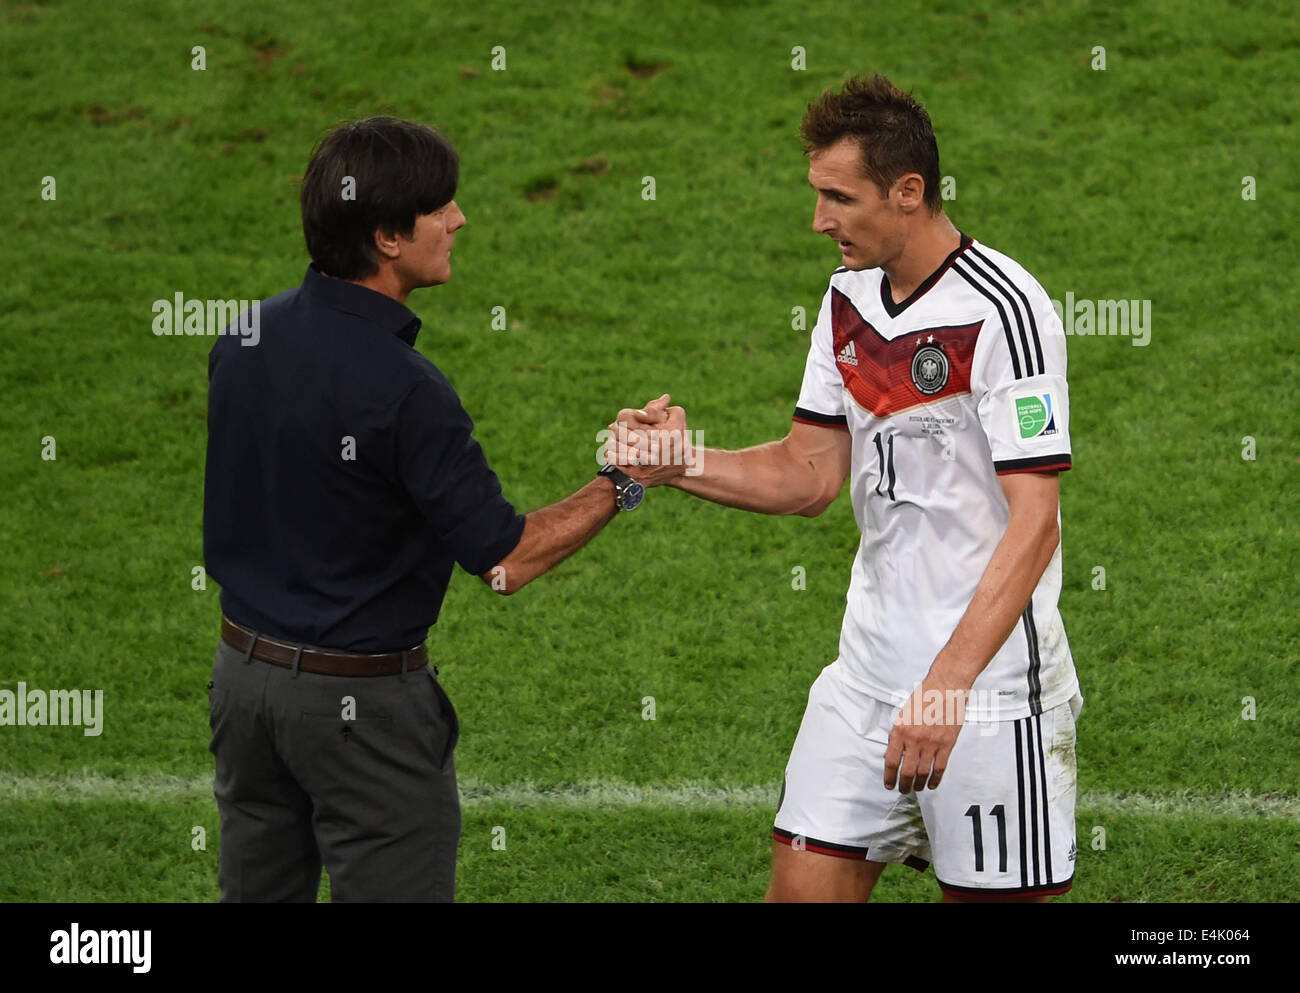 Rio De Janeiro, Brazil. 13th July, 2014. Germany's coach Joachim Loew (L) shakes hands with Miroslav Klose during the final match between Germany and Argentina of 2014 FIFA World Cup at the Estadio do Maracana Stadium in Rio de Janeiro, Brazil, on July 13, 2014. Credit:  Li Ga/Xinhua/Alamy Live News Stock Photo